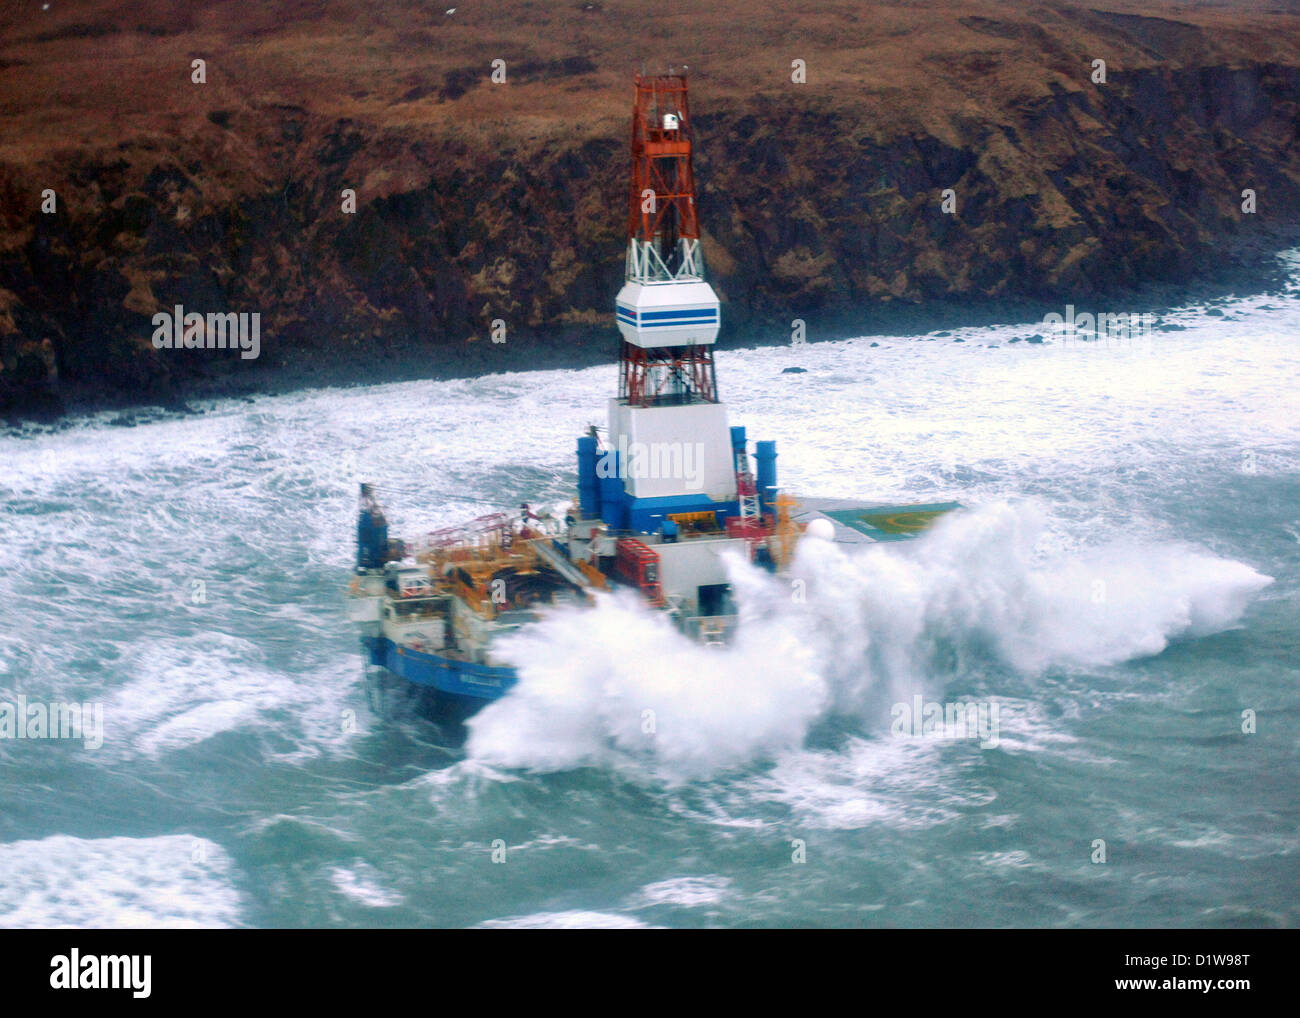 The mobile drilling unit Kulluk grounded in winter storms after breaking free of it tow January 1, 2013, 80 miles southwest of Kodiak City, Alaska. The Kulluk was floating free after the ship towing it lost power and its tow connection in the Kodiak archipelago. Stock Photo